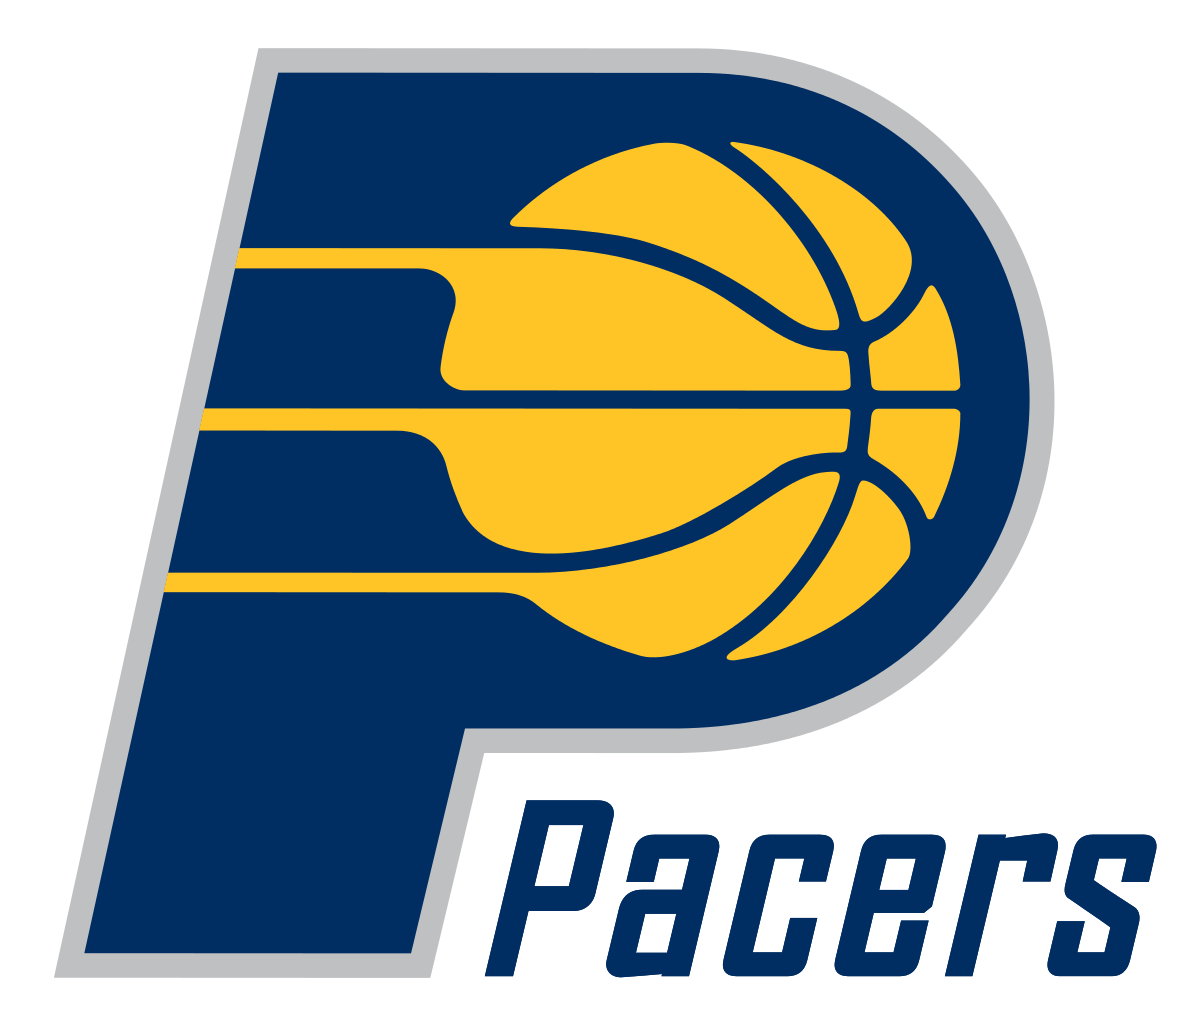 Indiana Pacers Logo PNG images